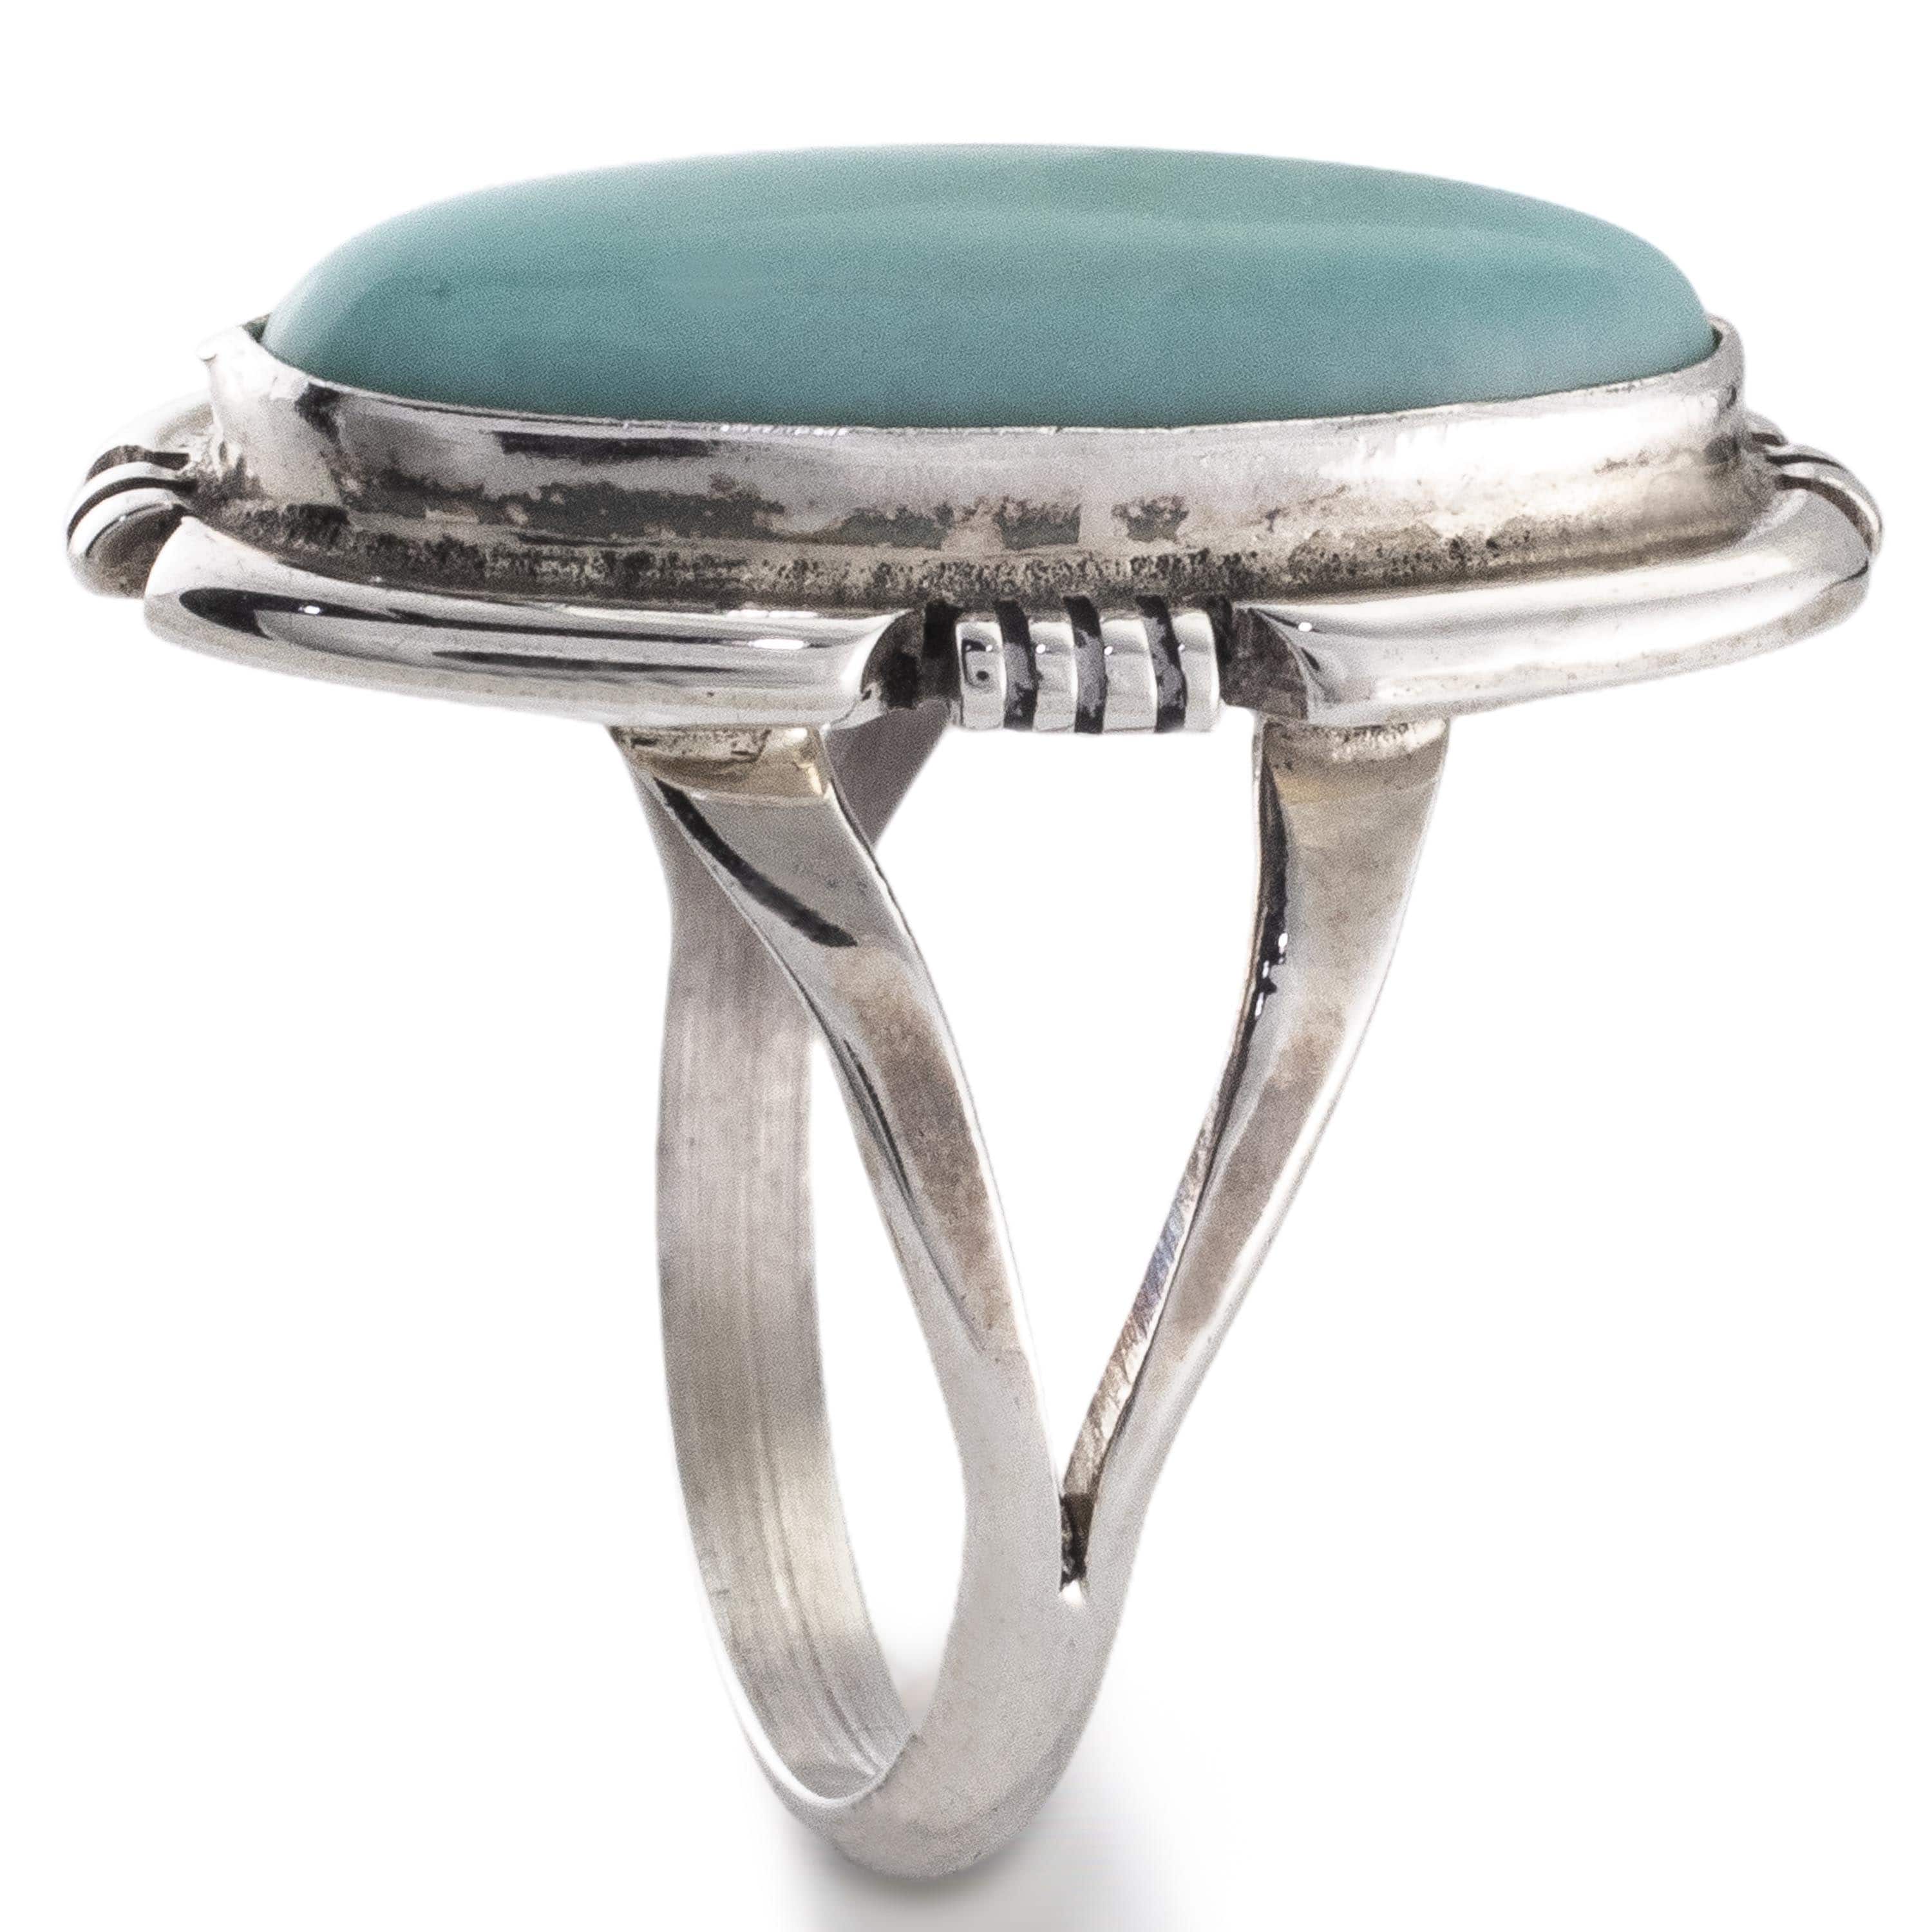 Kalifano Native American Jewelry Eddie Secatero Navajo Campitos Turquoise USA Native American Made 925 Sterling Silver Ring